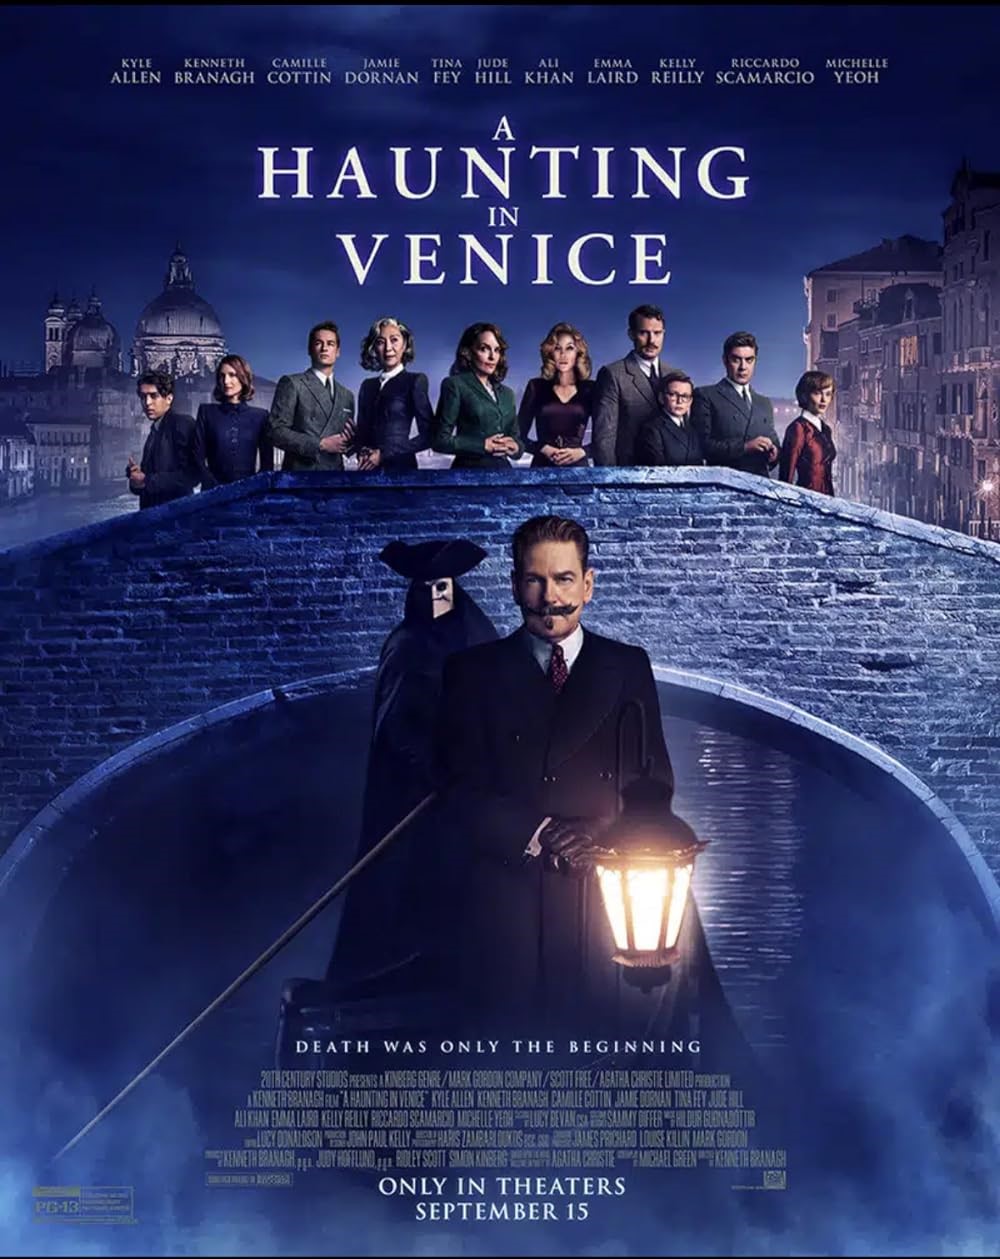 A Haunting in Venice Community Cinema on Apr 23, 14:00@Sutton Coldfield Town Hall (Archived) - Buy tickets and Get information on Sutton Coldfield Town Hall 